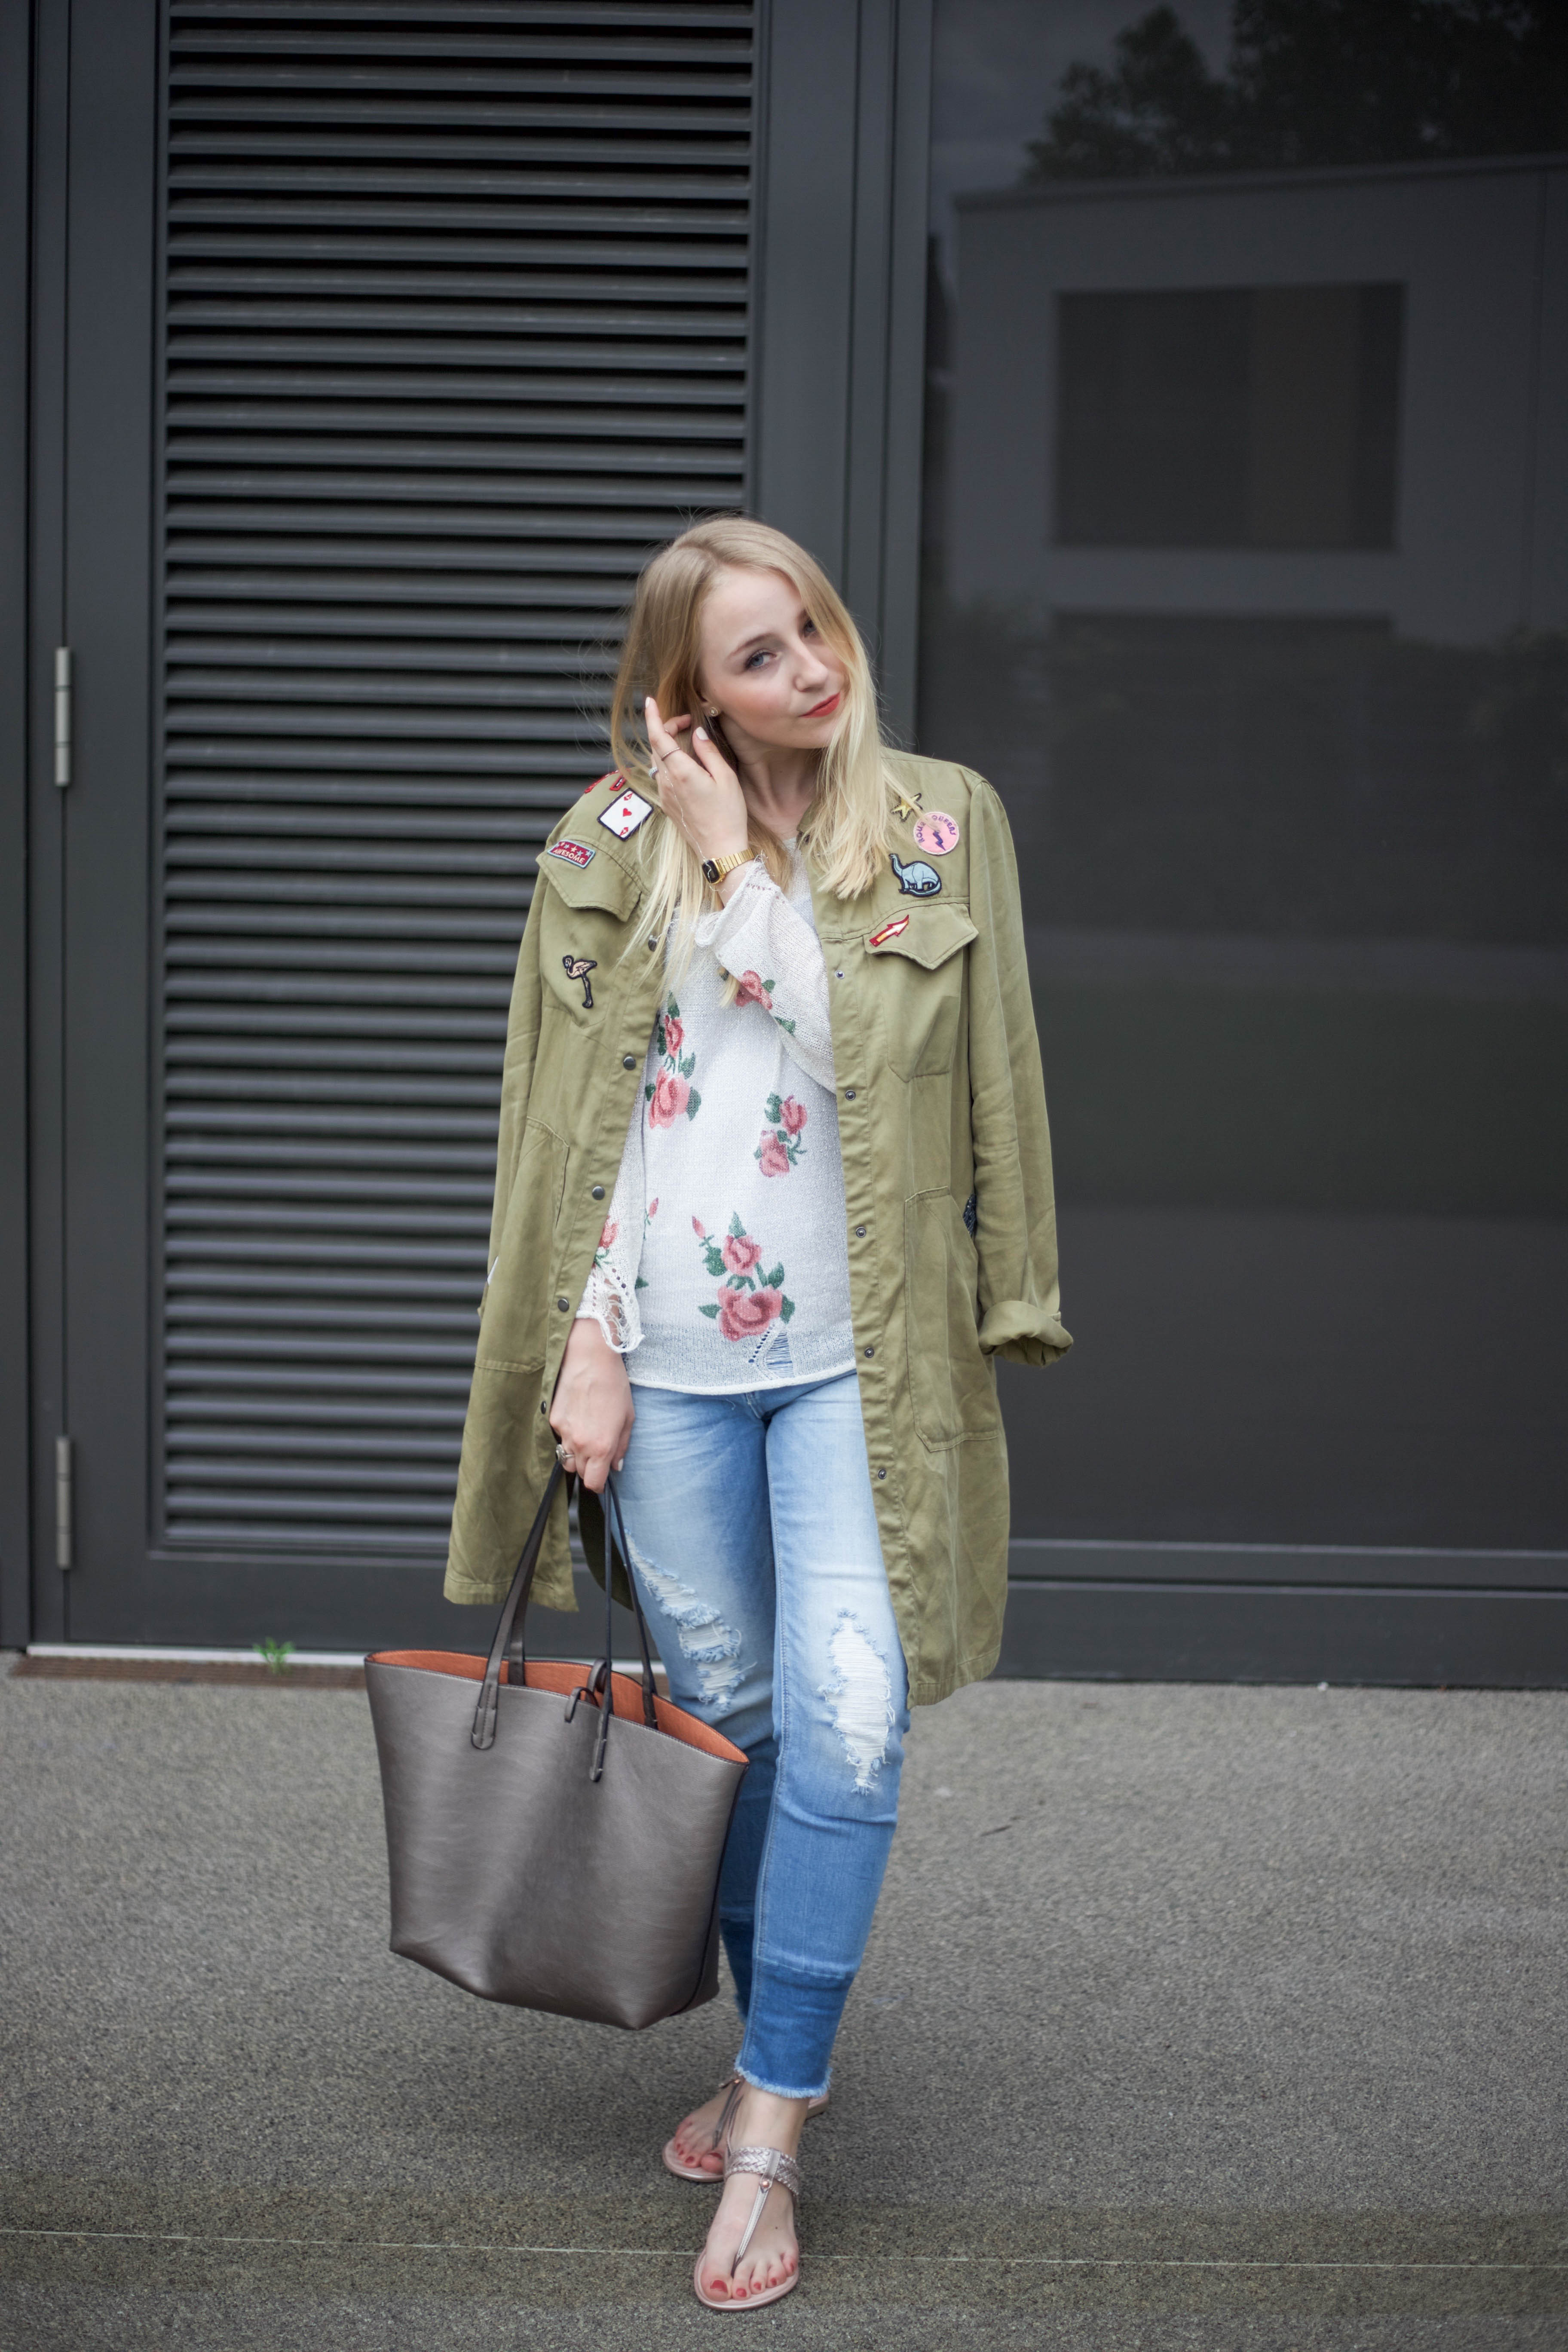 roland-schuhe-trendpage-outfit-jacke-patches-ripped-jeans_9416